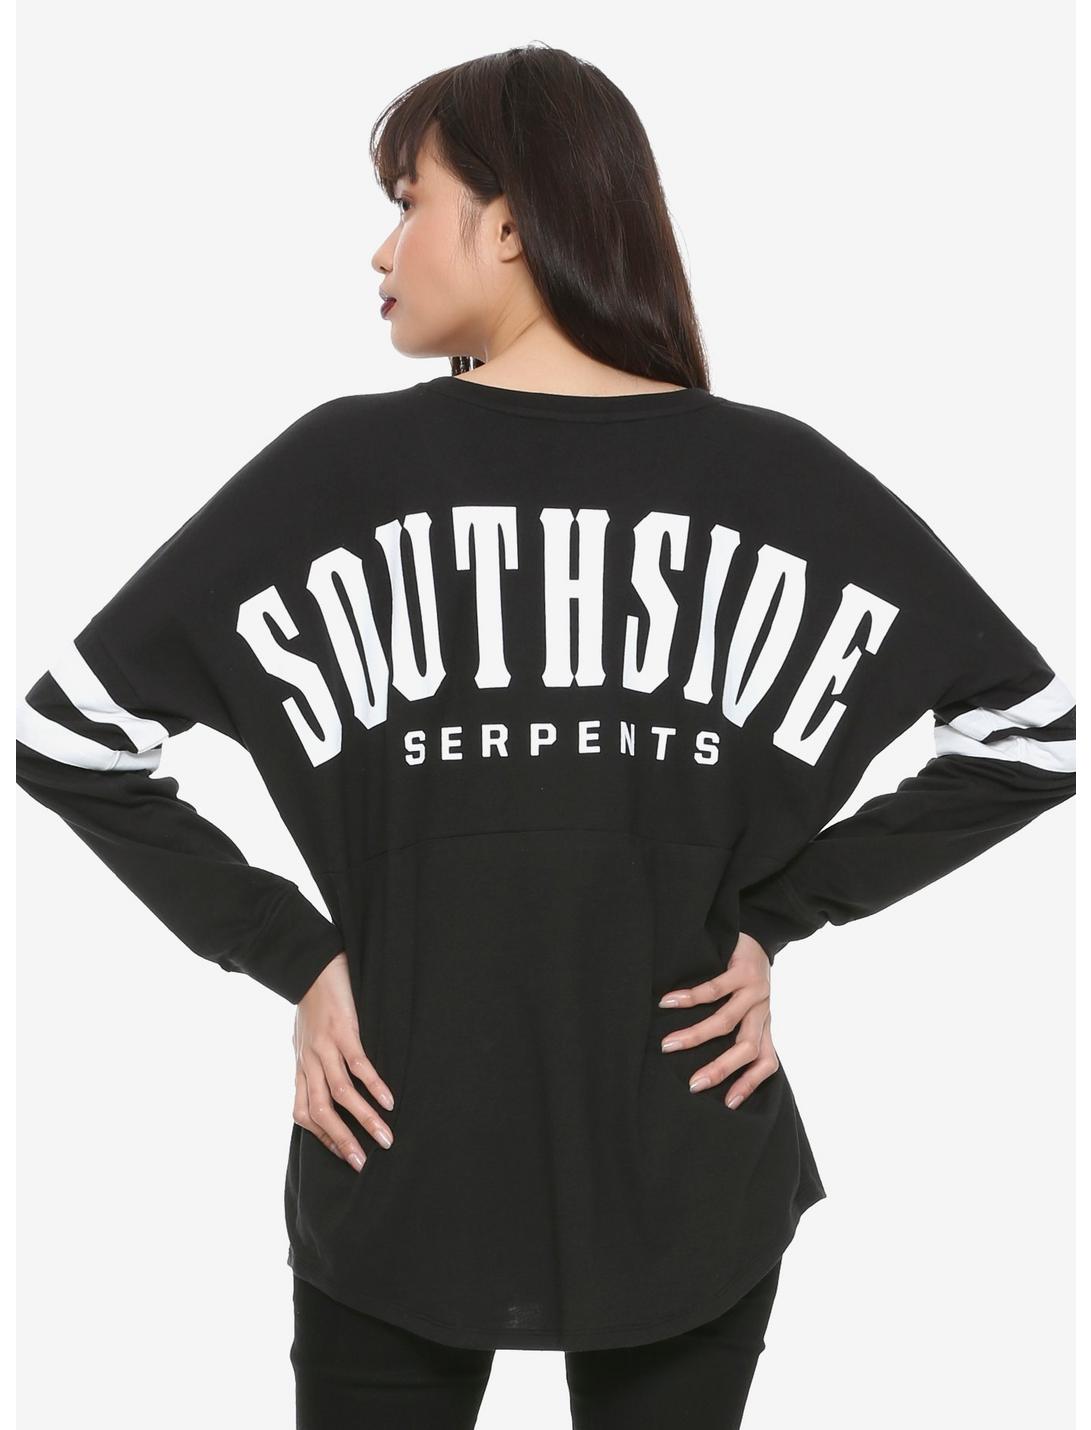 Women Junior's Riverdale Southside Serpents Girls Long-Sleeve Athletic –  Rex Distributor, Inc. Wholesale Licensed Products and T-shirts, Sporting  goods